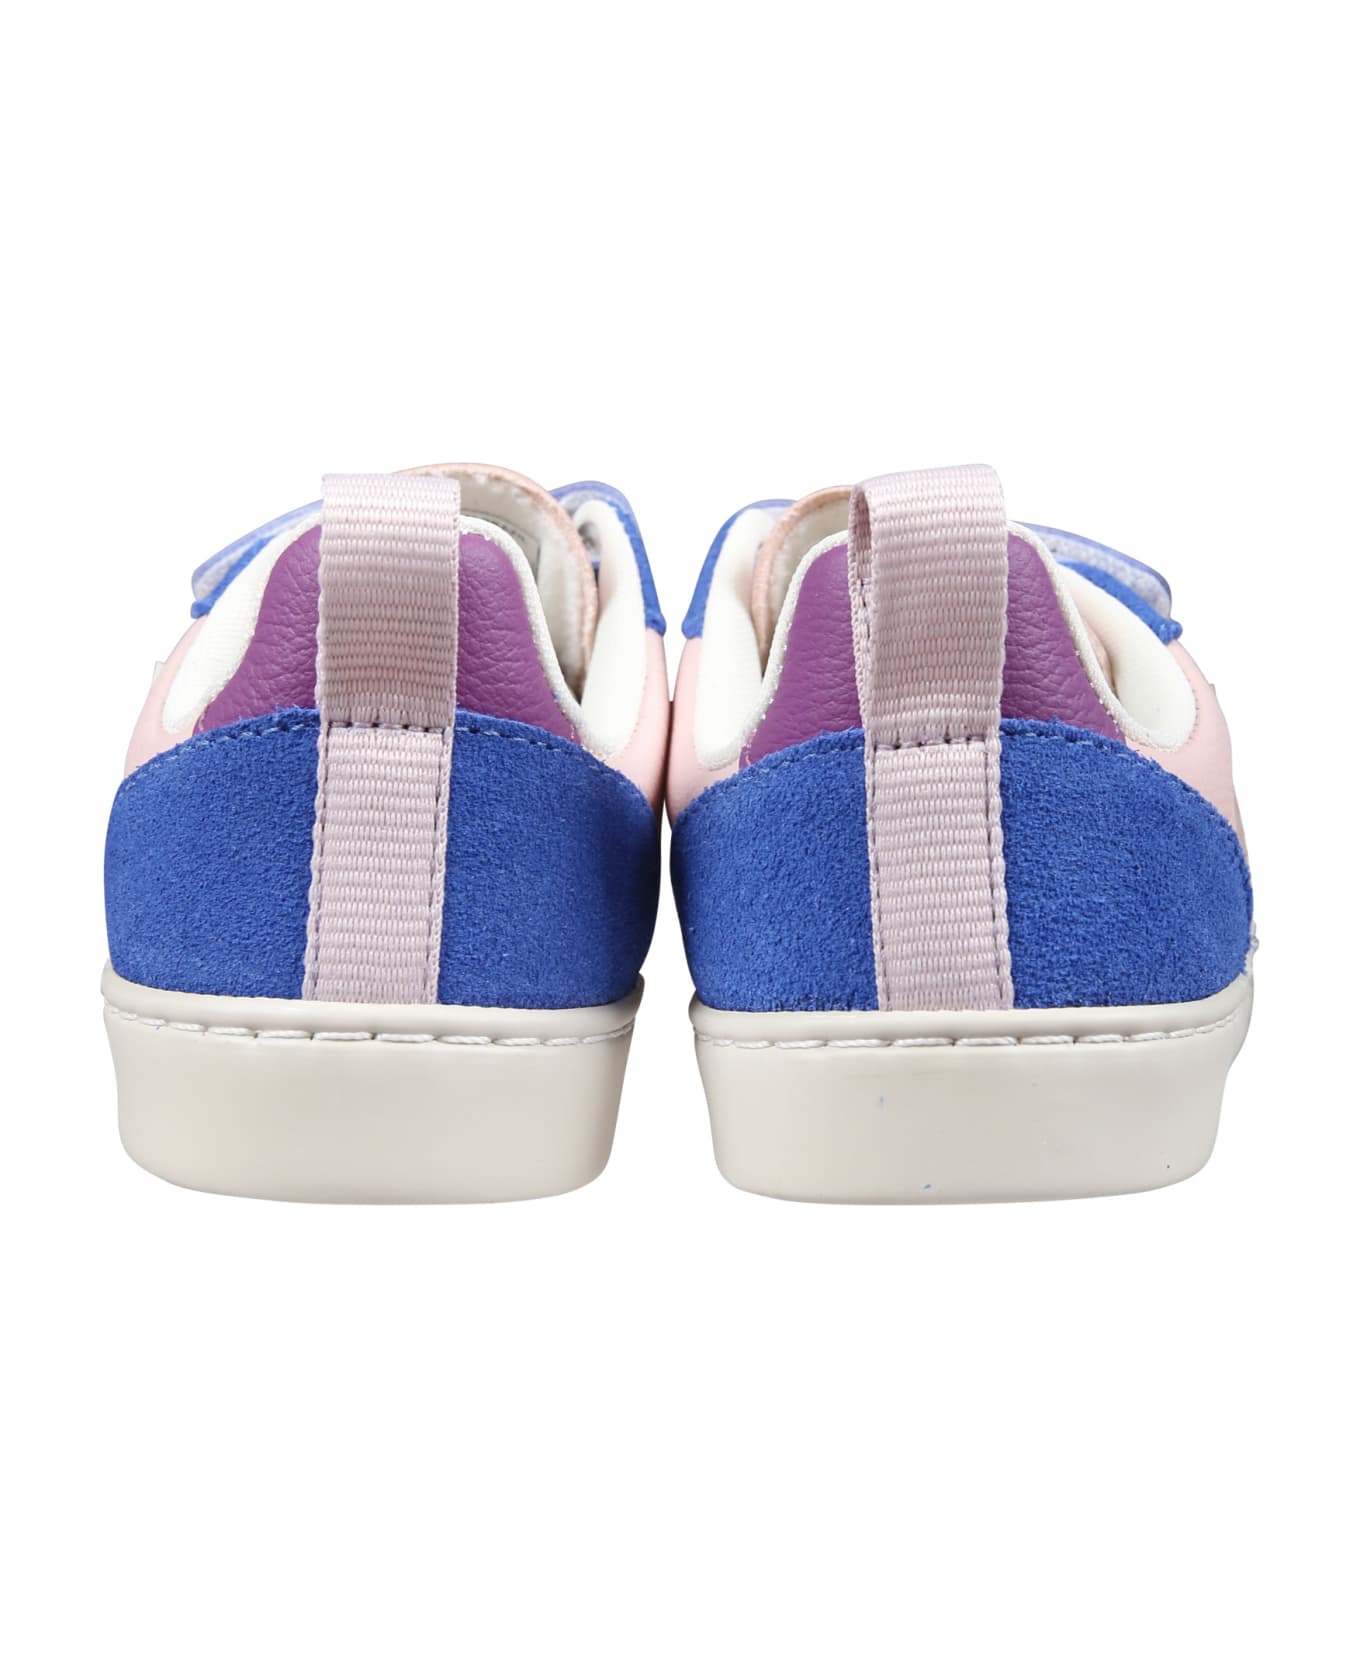 Veja Pink Sneakers For Girl With Logo - Multicolor